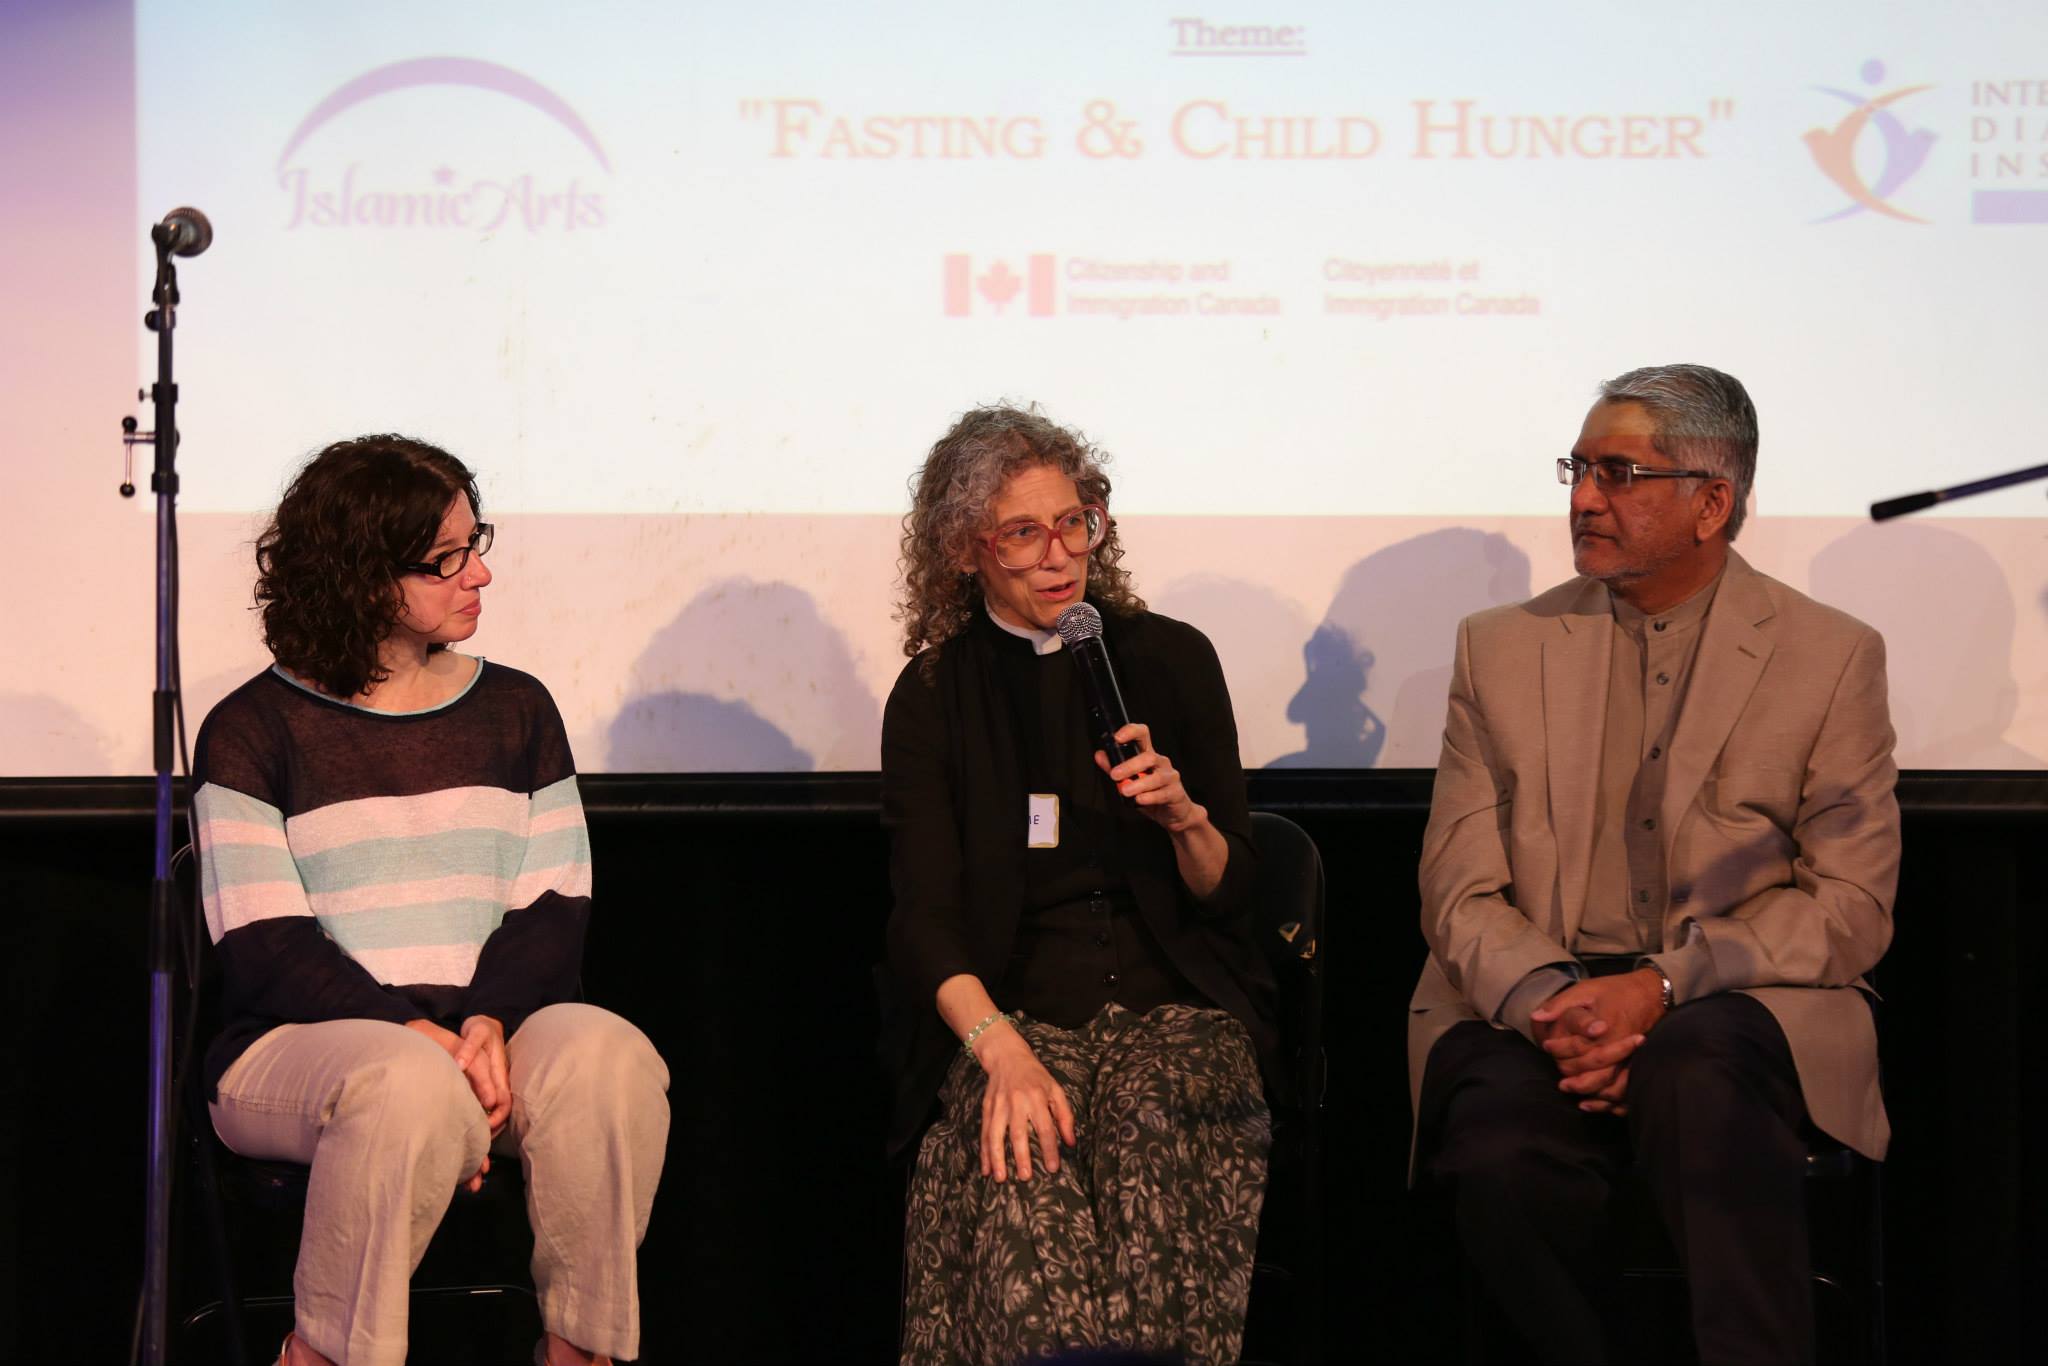 Interfaith Iftar tackles issue of child hunger